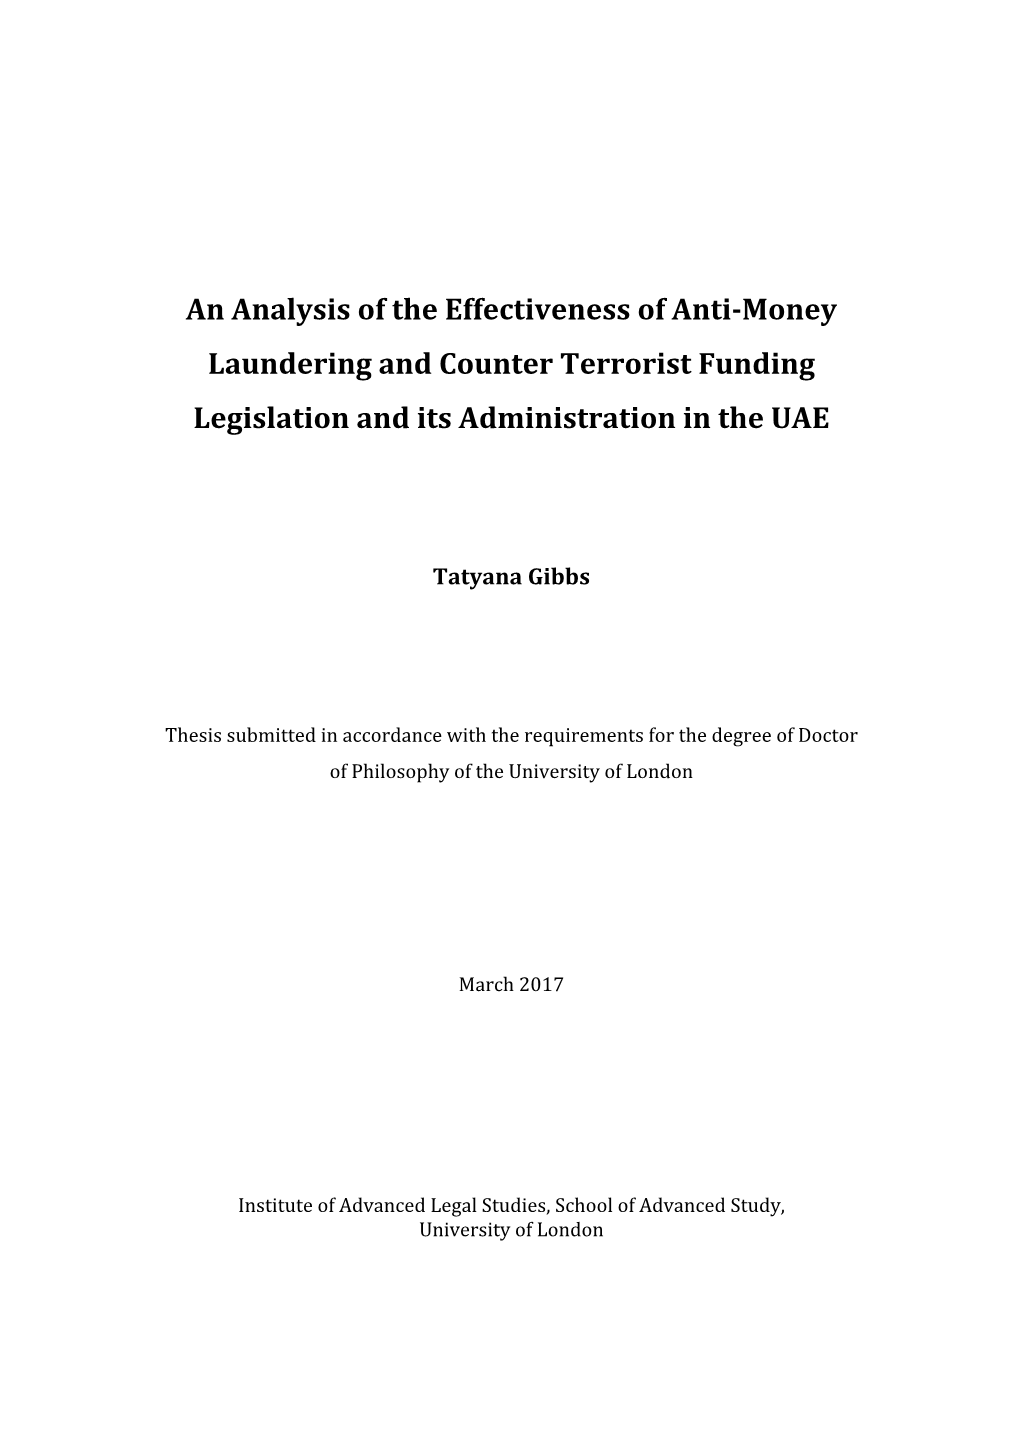 An Analysis of the Effectiveness of Anti-‐Money Laundering and Counter